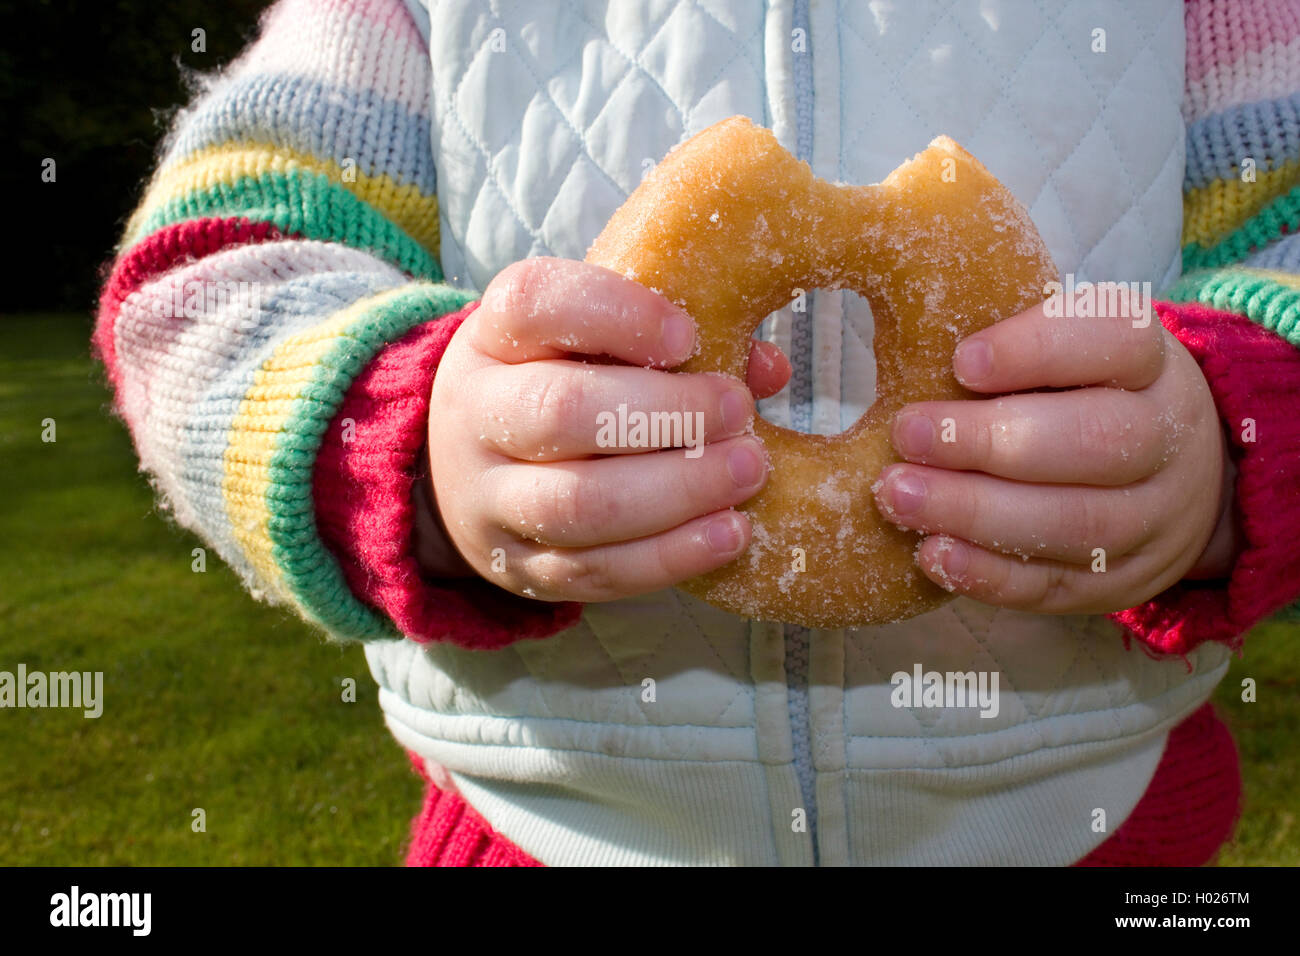 Small child with sticky fingers eating a huge donut. Stock Photo